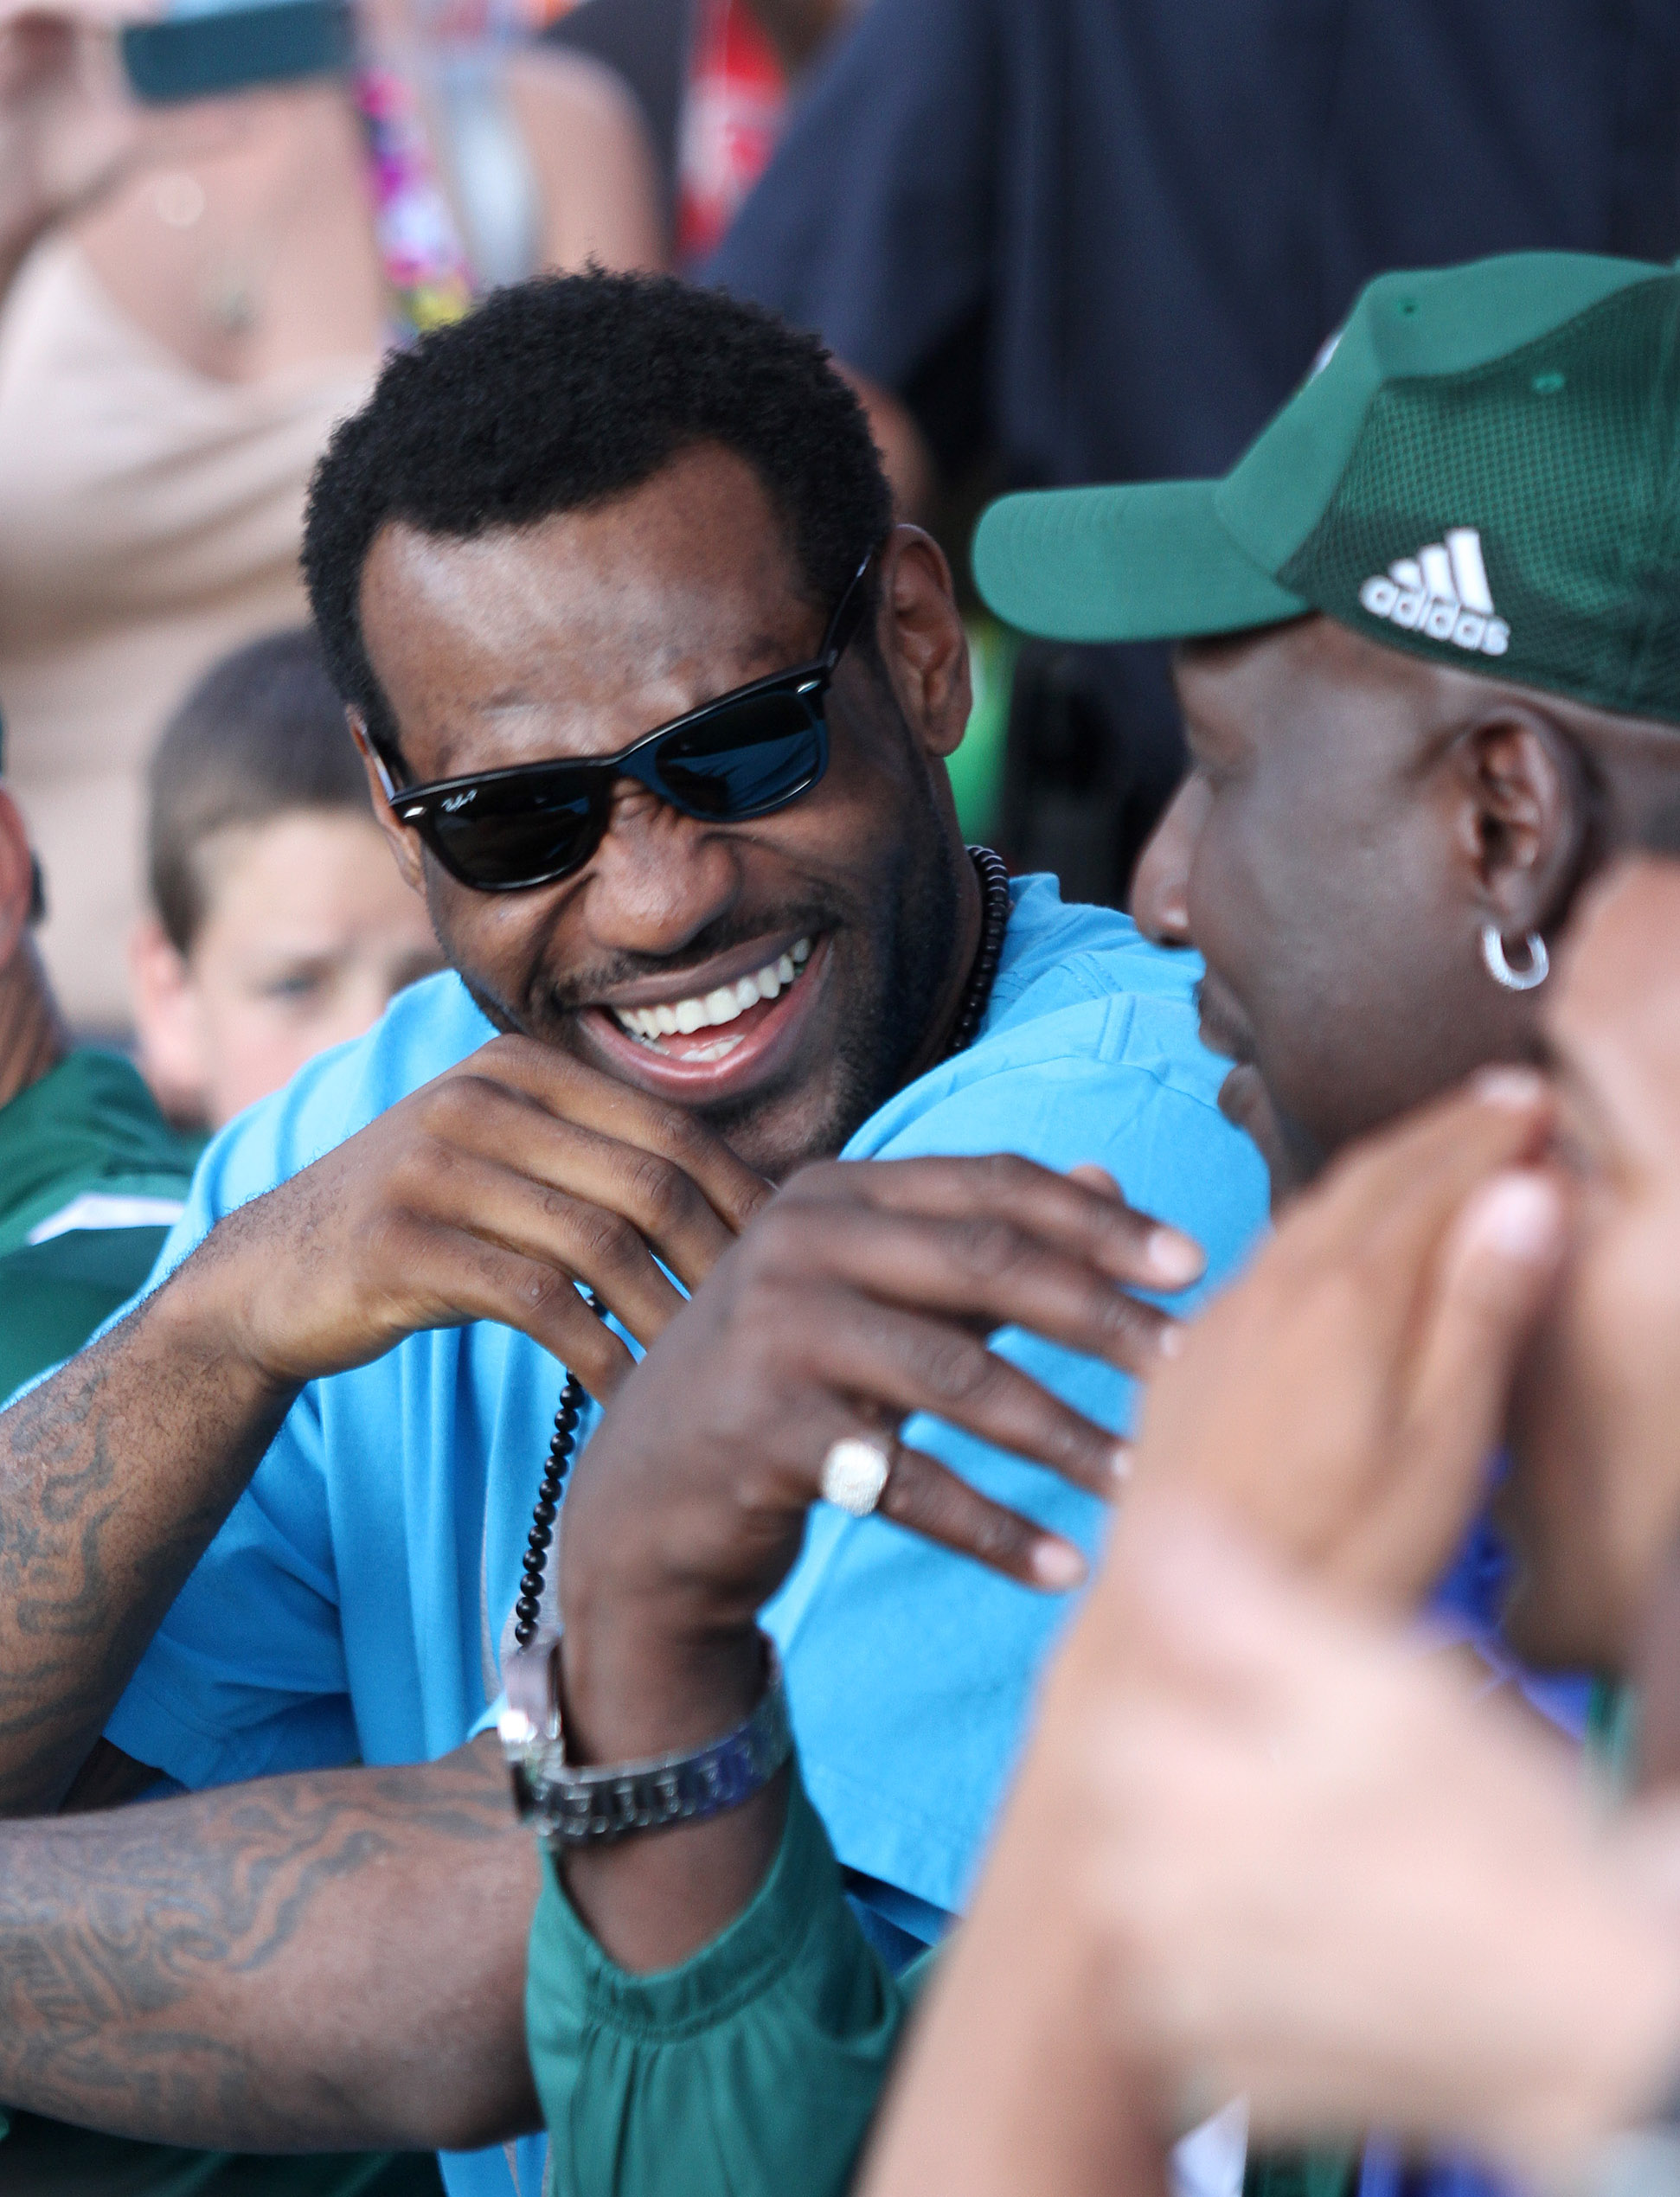 LeBron James shares a laugh with former NBA player Darryl Dawkins at the Cleveland Sprite Slam Dunk Showdown at Time Warner Cable Amphitheater Saturday, May 29, 2010 at Tower City in Cleveland. (Joshua Gunter/ The Plain Dealer)